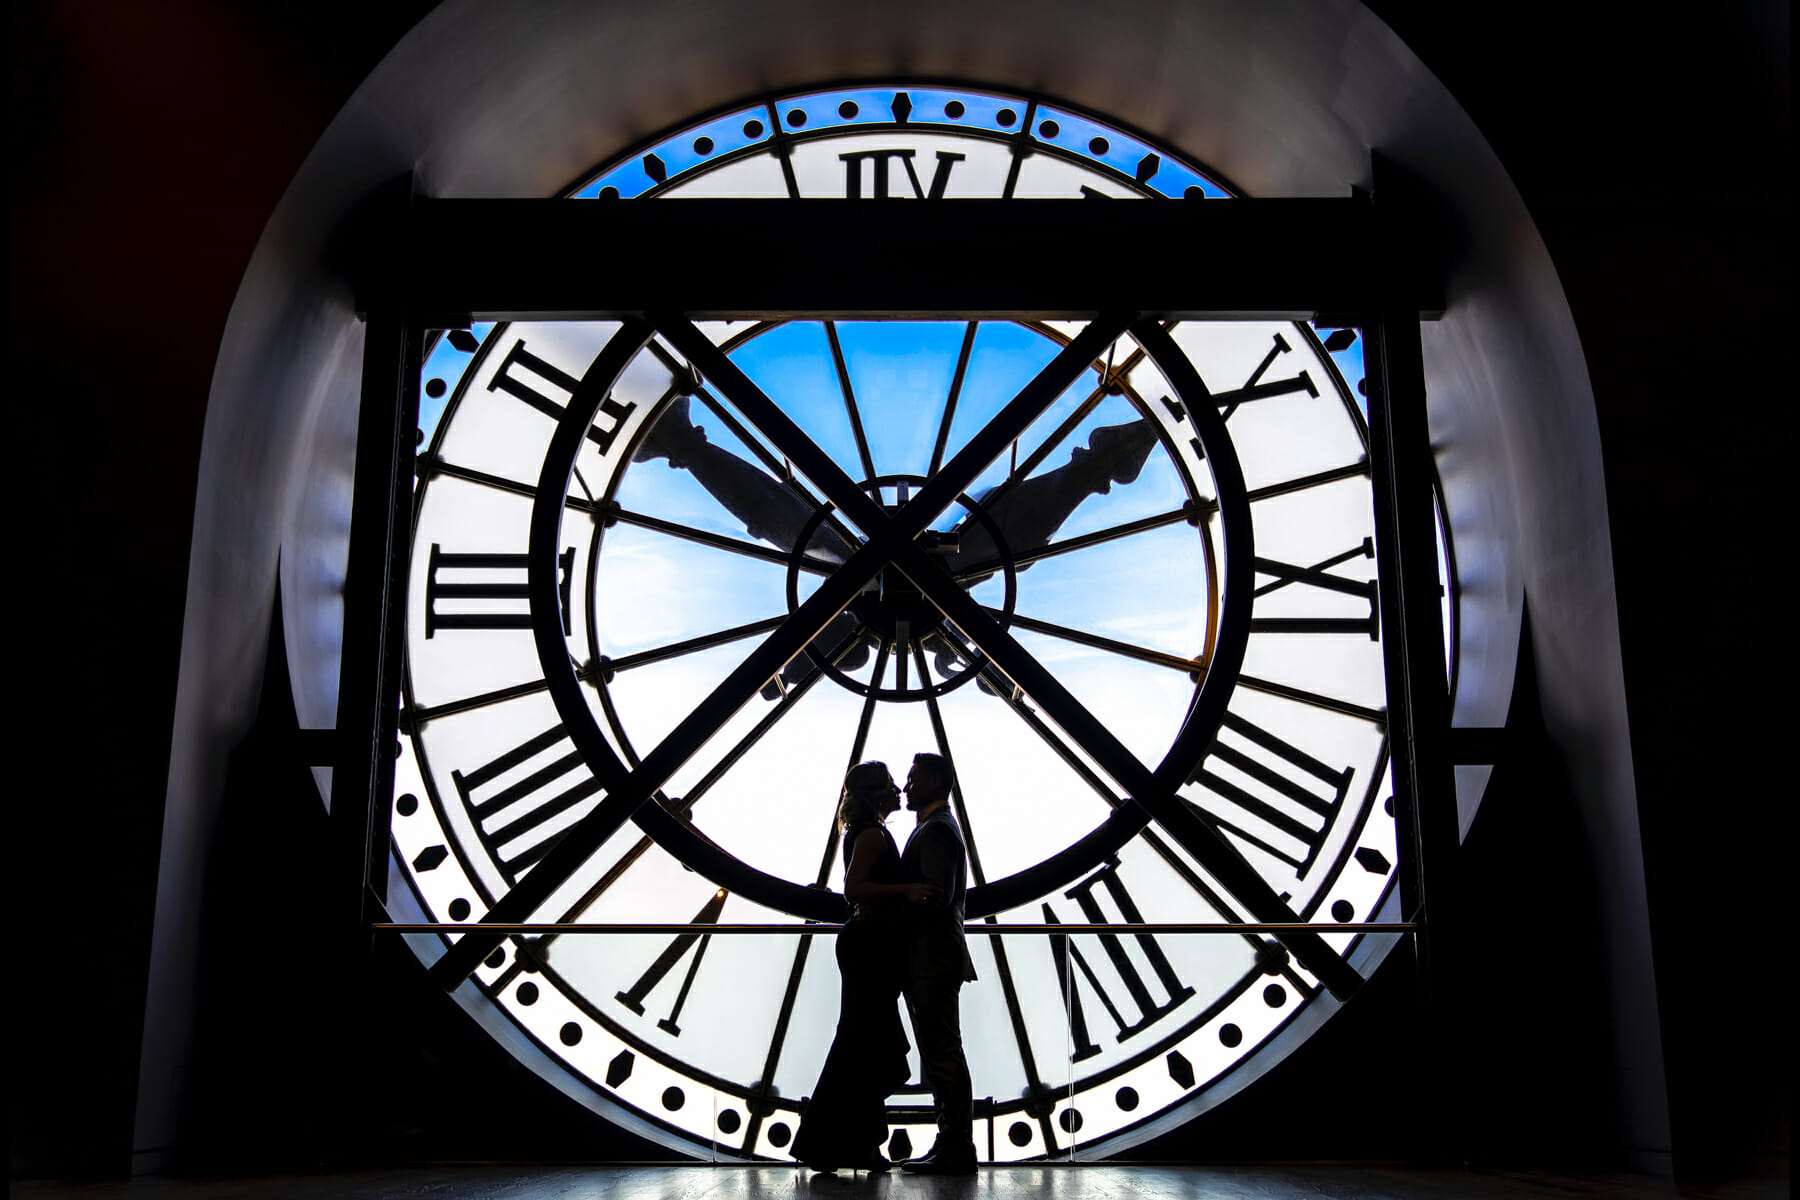 Top 10 places to take photos in Paris: Musee d'Orsay